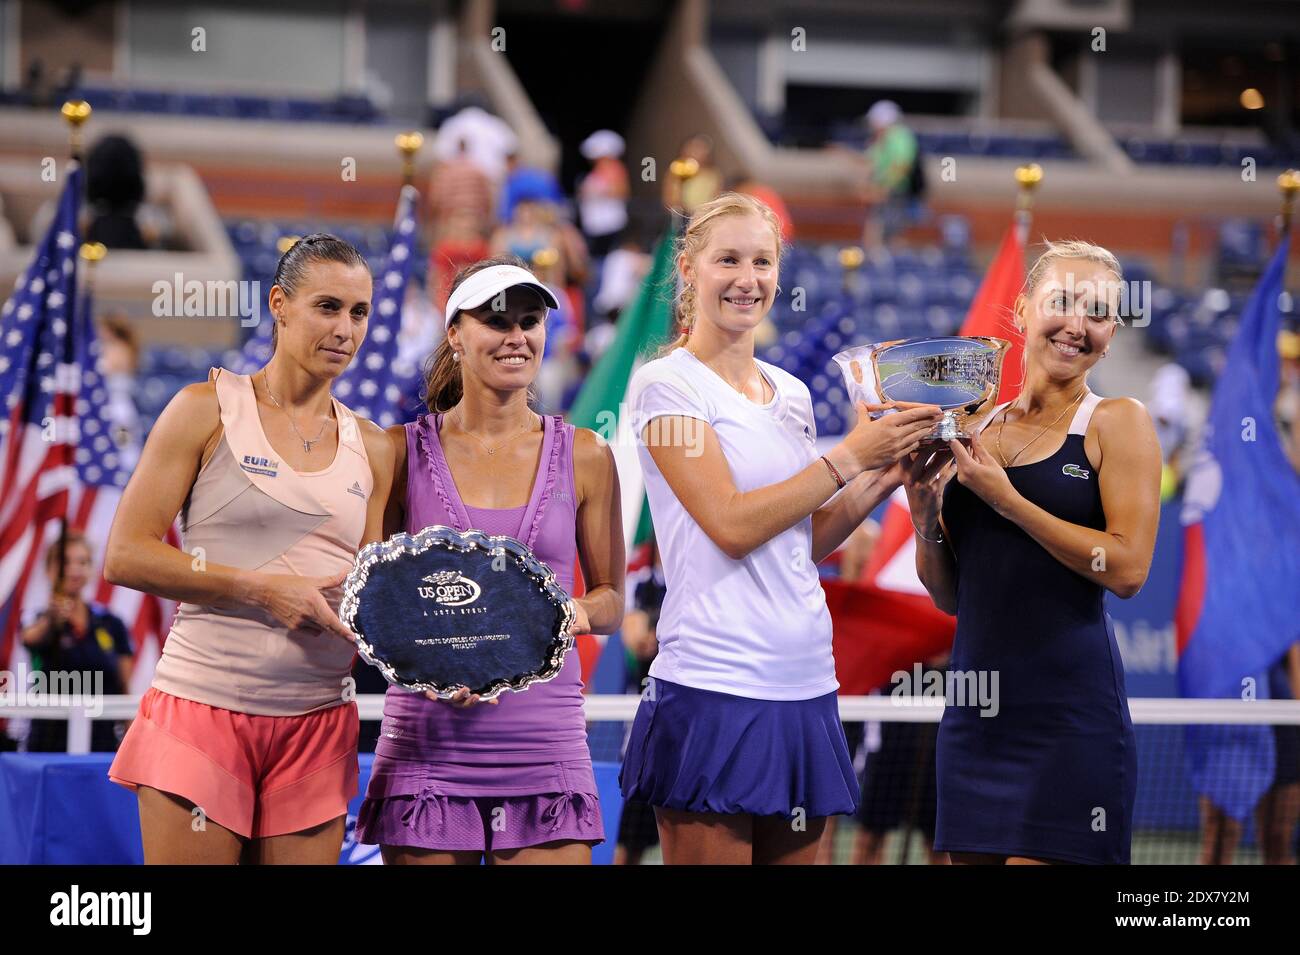 Ekaterina Makarova (2R), Elena Vesnina (R) of Russia, Martina Hingis (2L) of Switzerland and Flavia Pennetta (L) of Italy pose with their trophies after their women's doubles final match on Day Thirteen of the 2014 US Open at the USTA Billie Jean King National Tennis Center on September 6, 2014 in the Flushing neighborhood of the Queens borough of New York City. Makarova and Vesnina defeated Hingis and Pennetta in three sets 2-6, 6-3, 6-2. Photo by CorinneDubreuil/ABACAPRESS.COM Stock Photo